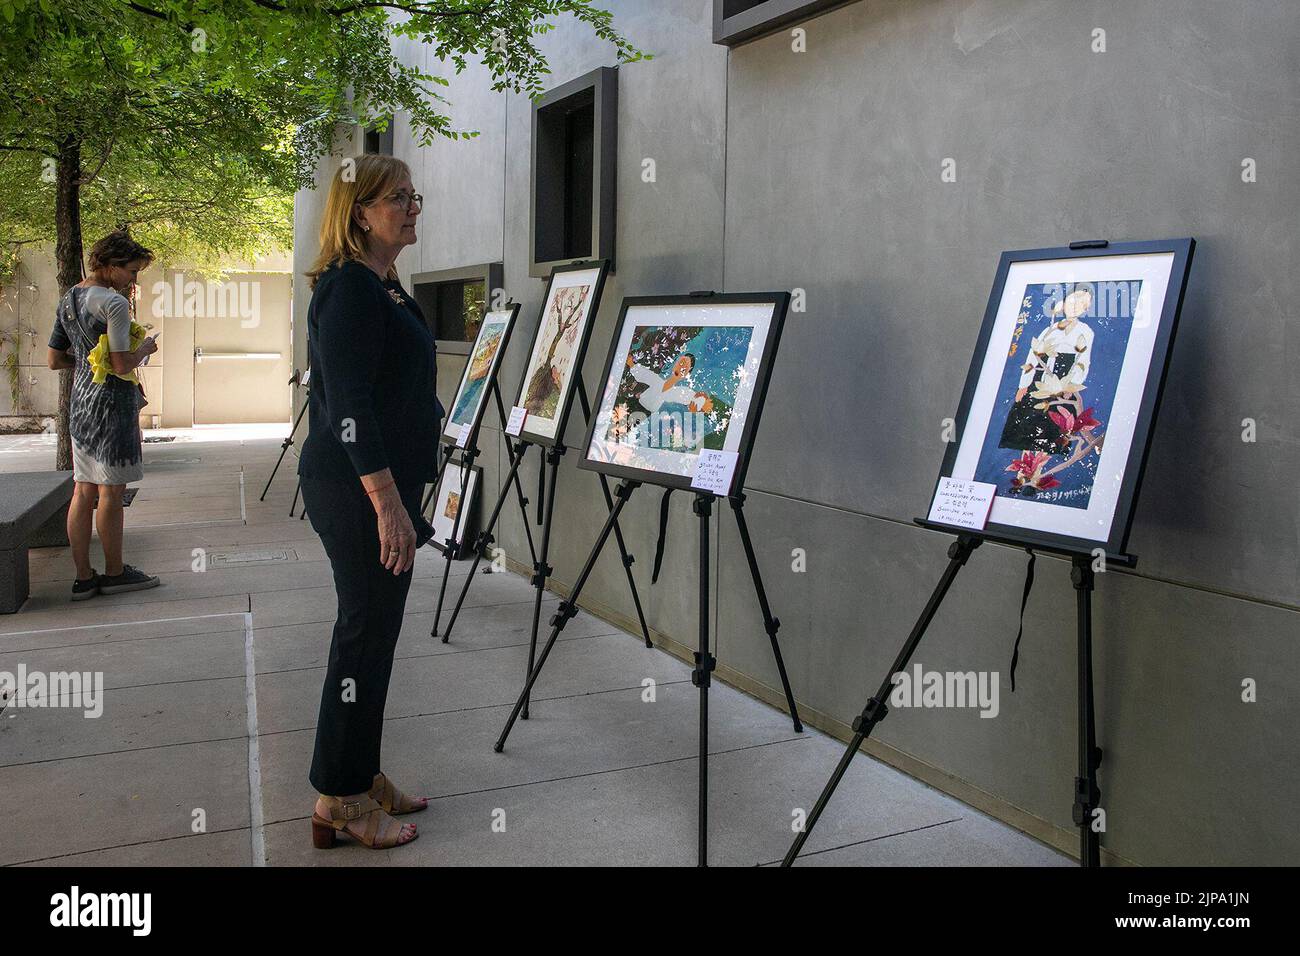 Dallas, USA. 14th Aug, 2022. A woman views paintings about 'comfort women' at an art exhibition marking the sixth International Memorial Day for 'Comfort Women' in Dallas, Texas, the United States, Aug. 14, 2022. Commemoration events including a film screening, an art exhibition, a peace and justice walk, and a candlelight vigil were held on Sunday to mark the sixth International Memorial Day for 'Comfort Women' in Dallas. TO GO WITH 'Feature: Unfinished story, unforgettable pain of WWII 'comfort women'' Credit: Xin Jin/Xinhua/Alamy Live News Stock Photo